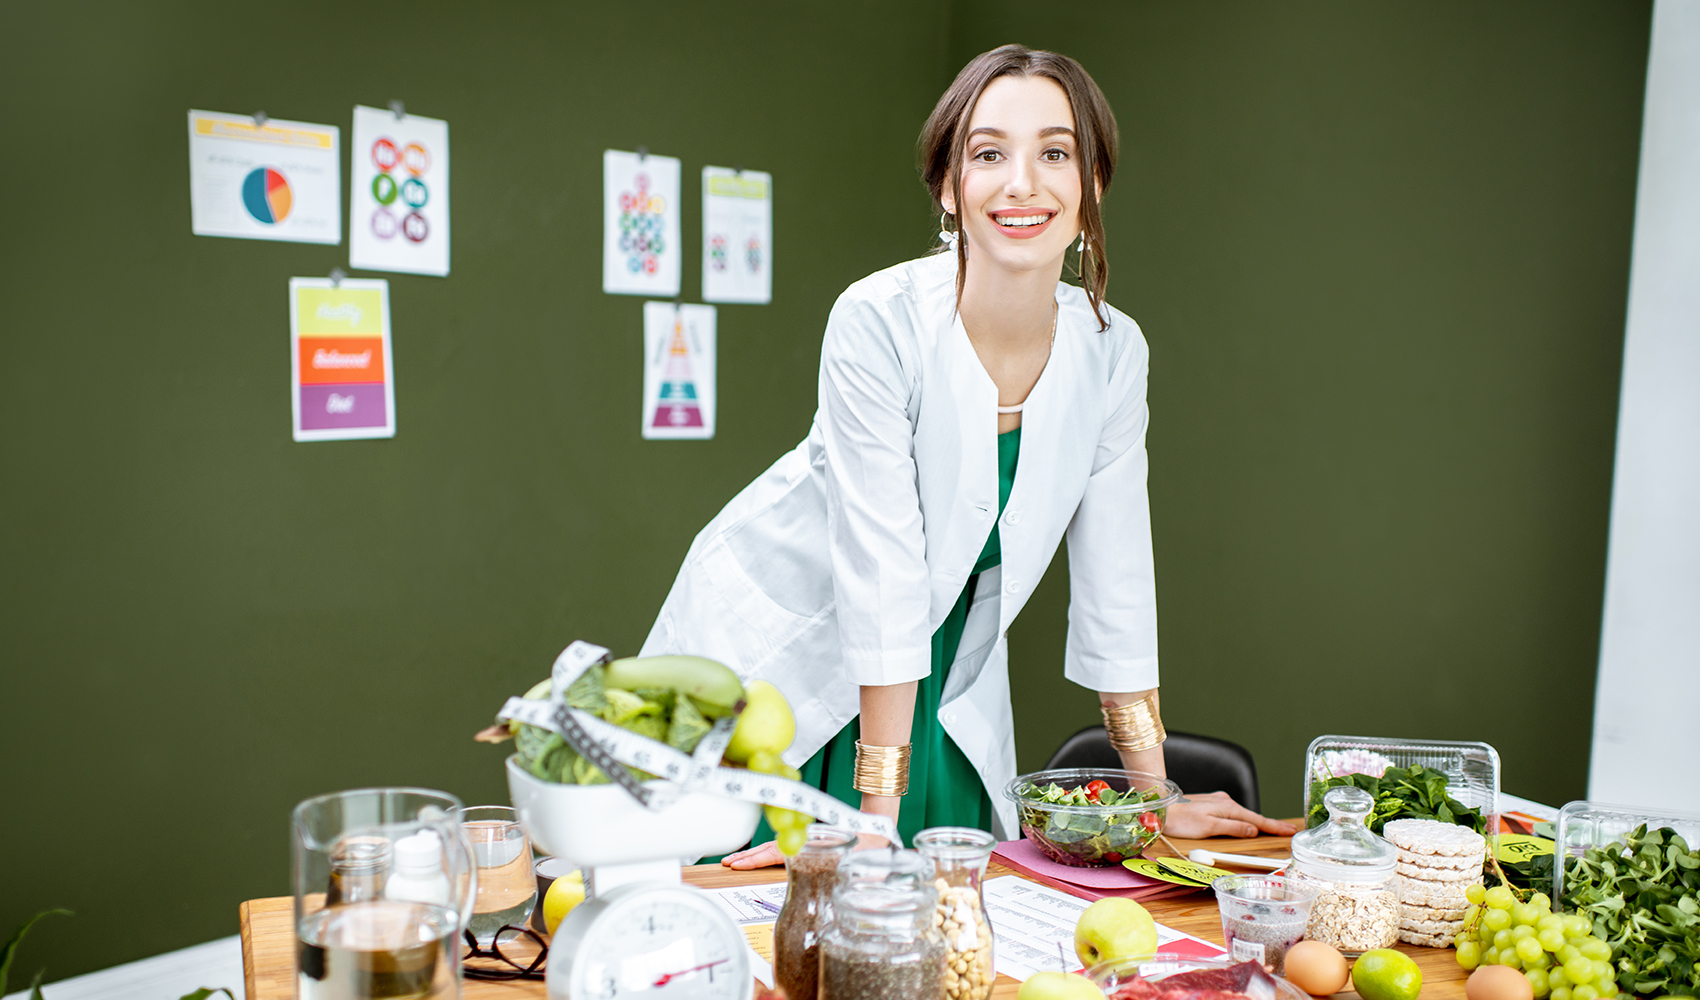 Nutritionist Vs. Dietitian: What's the Difference?